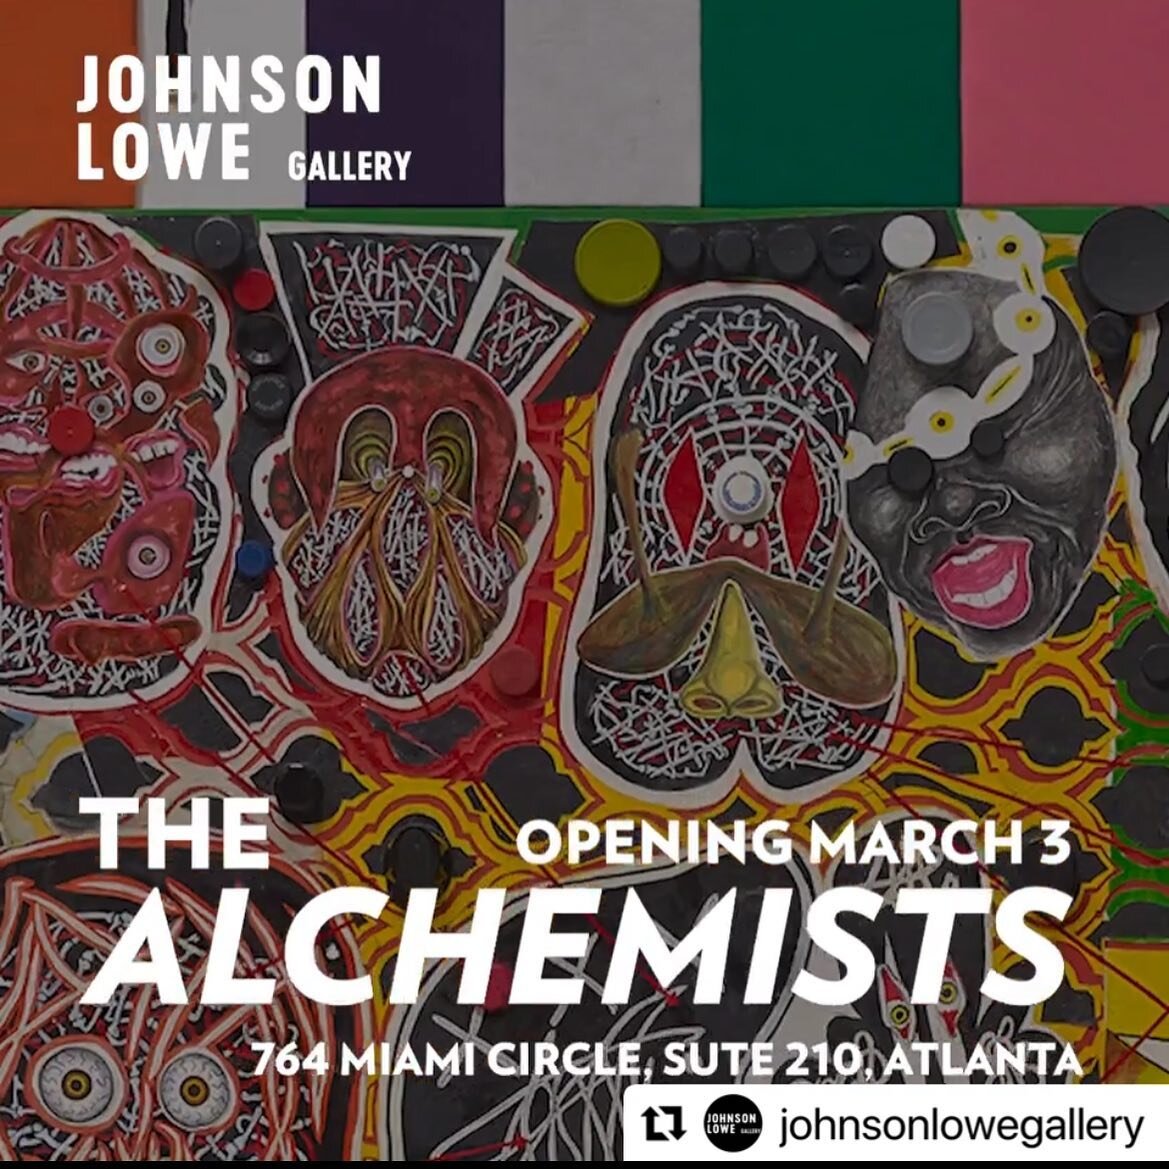 ATLANTA!!! PULL UP! I&rsquo;ll be there!! 
This amazing show opens TOMORROW and I am so honored to be among this amazing group of artists. 🤯🤯🤯 Come on out!
.

Co-curated by art critic and curator @sephsees and gallery director Donovan Johnson, new